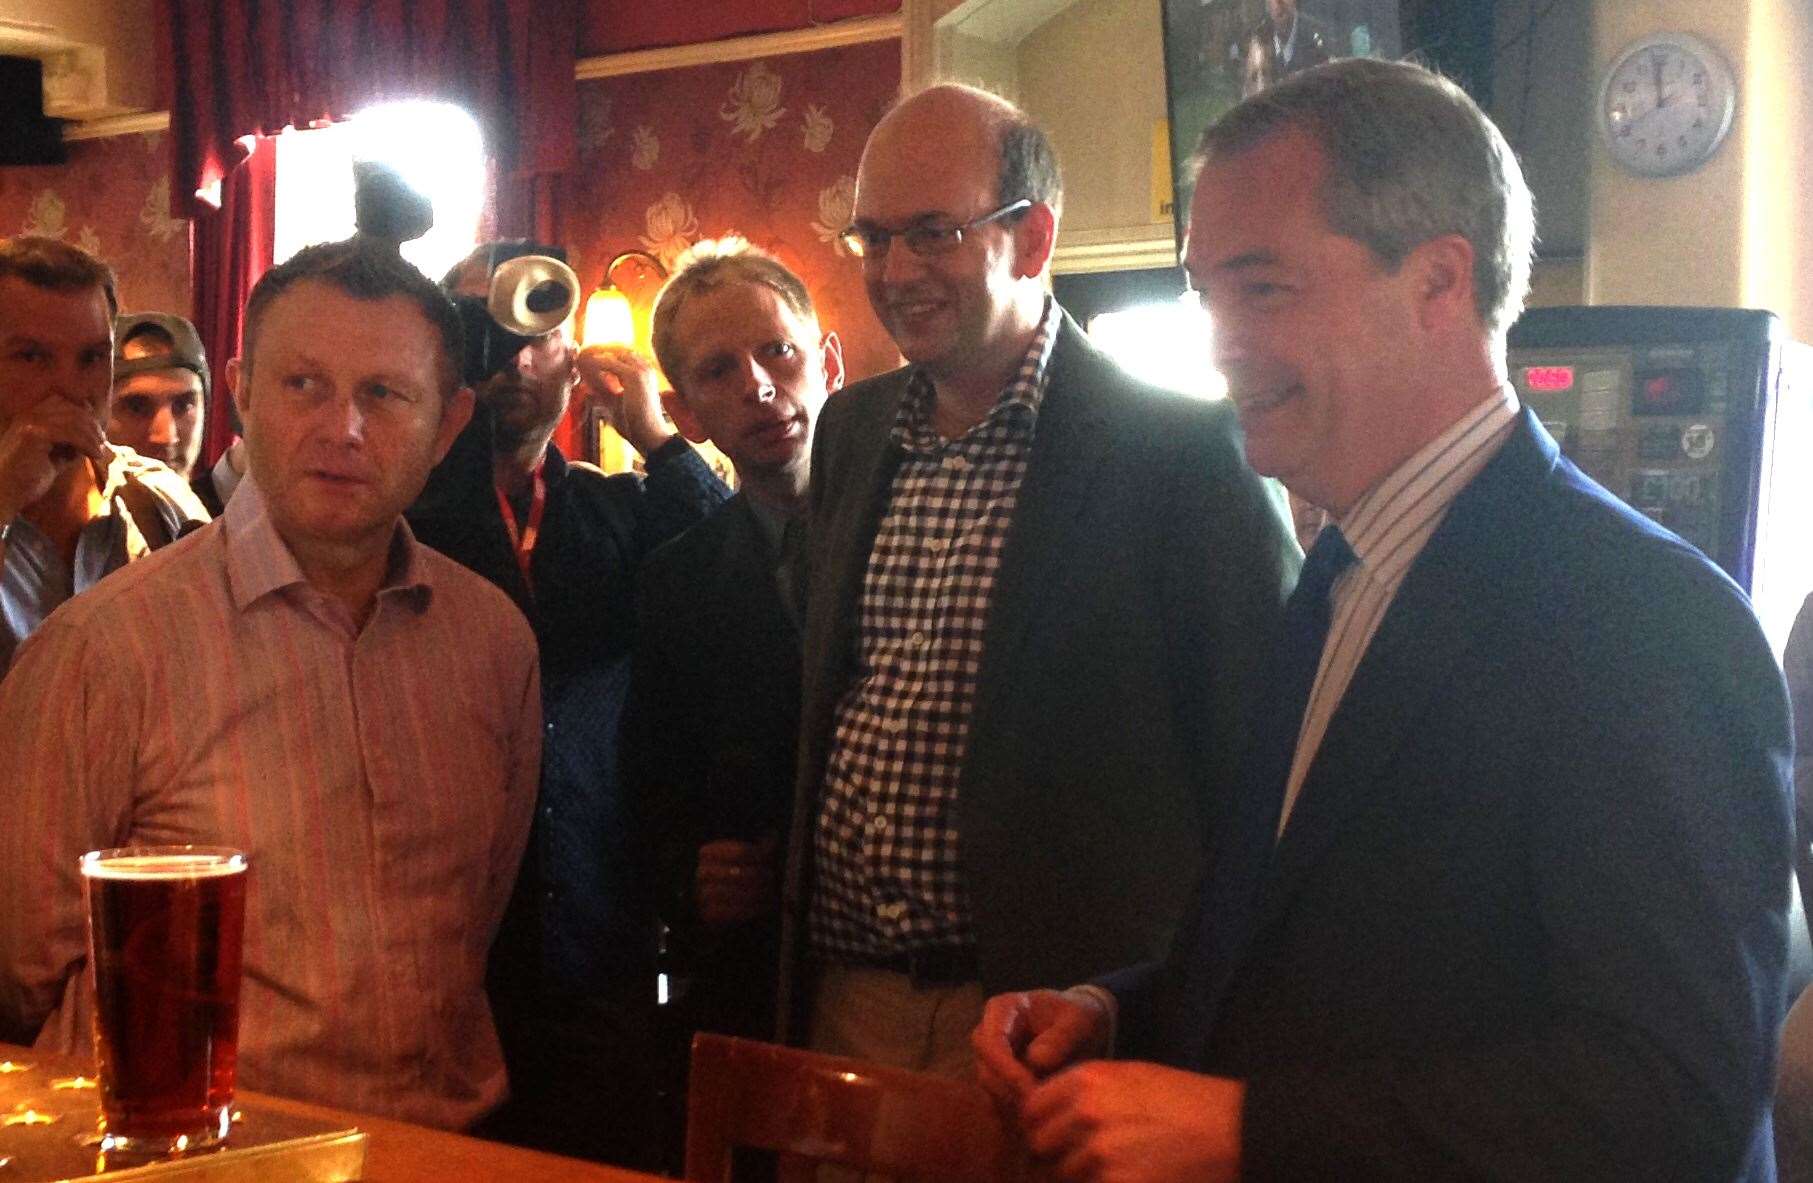 Mark Reckless and Nigel Farage in The Crown pub in Rochester